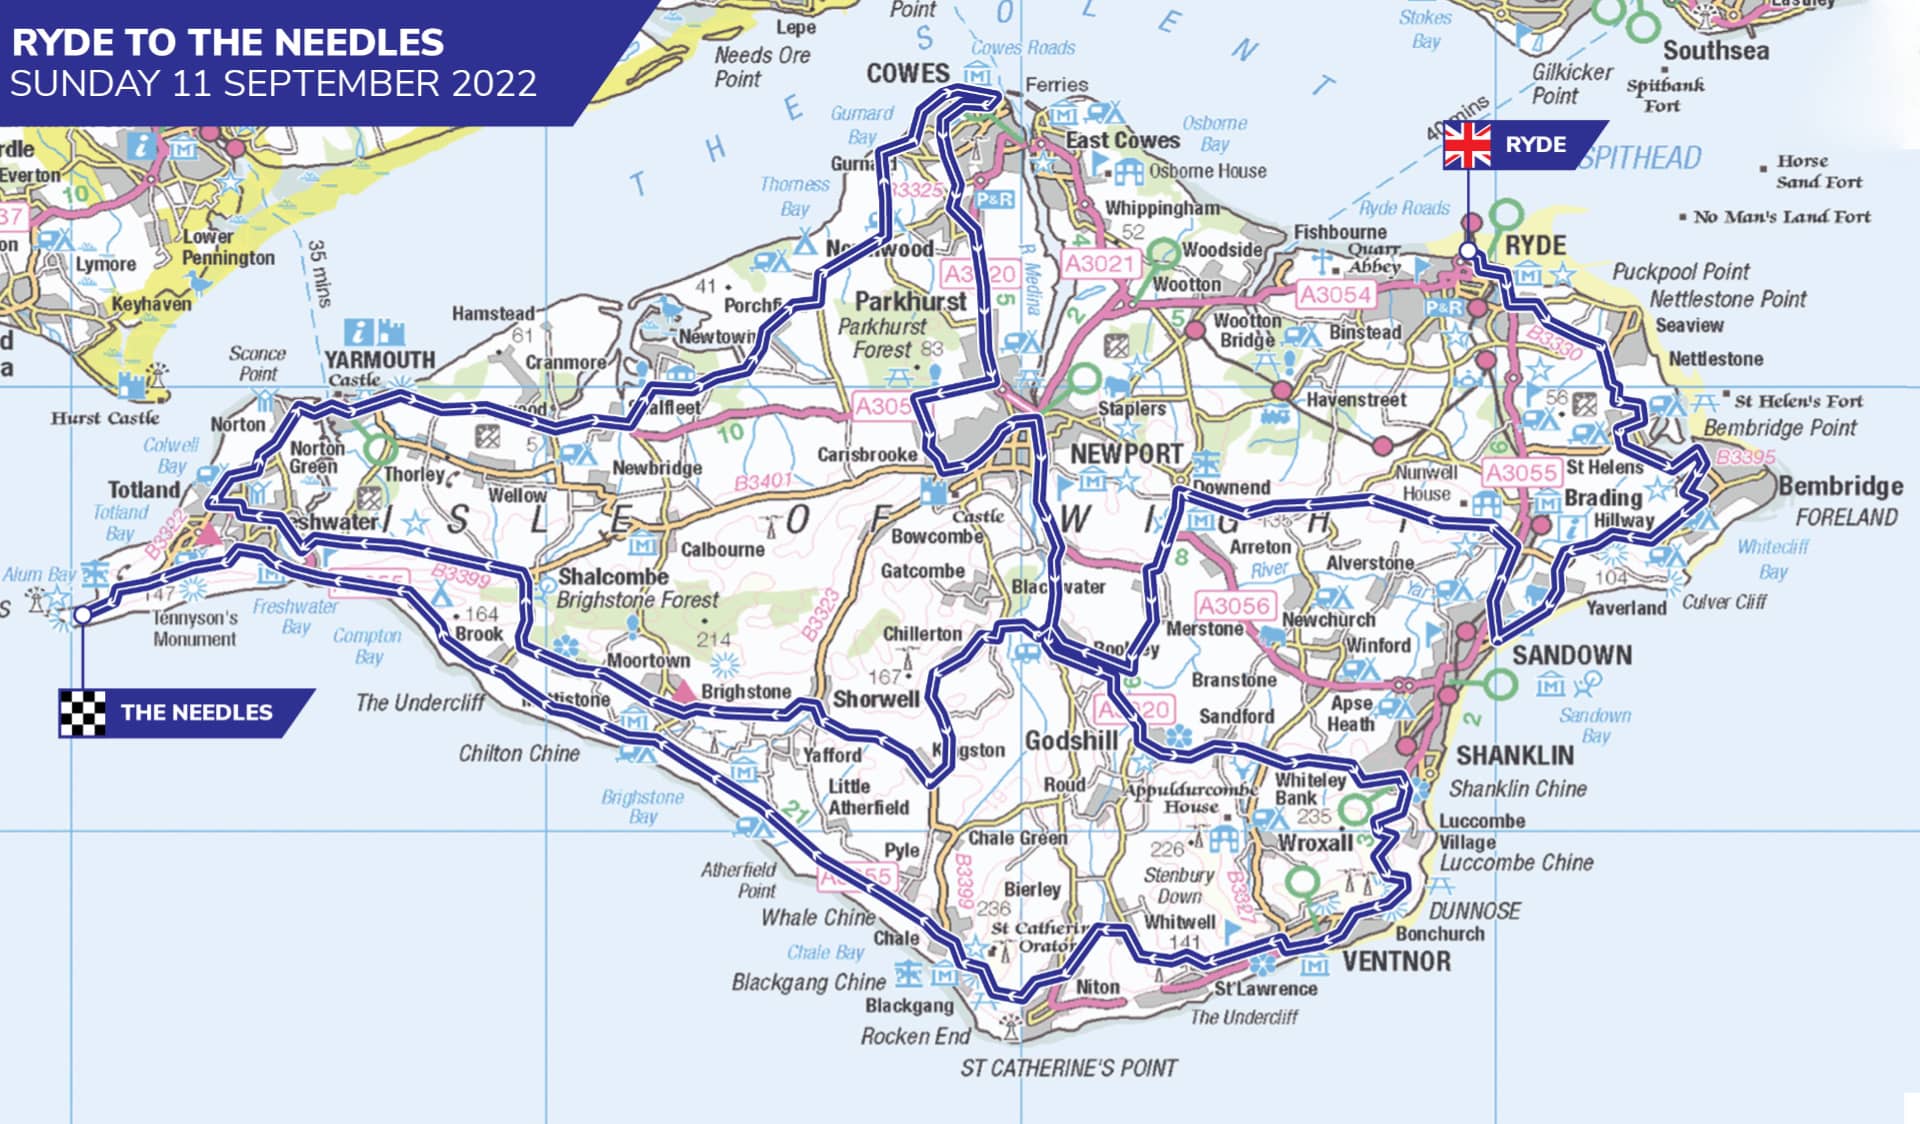 tour of britain isle of wight route map